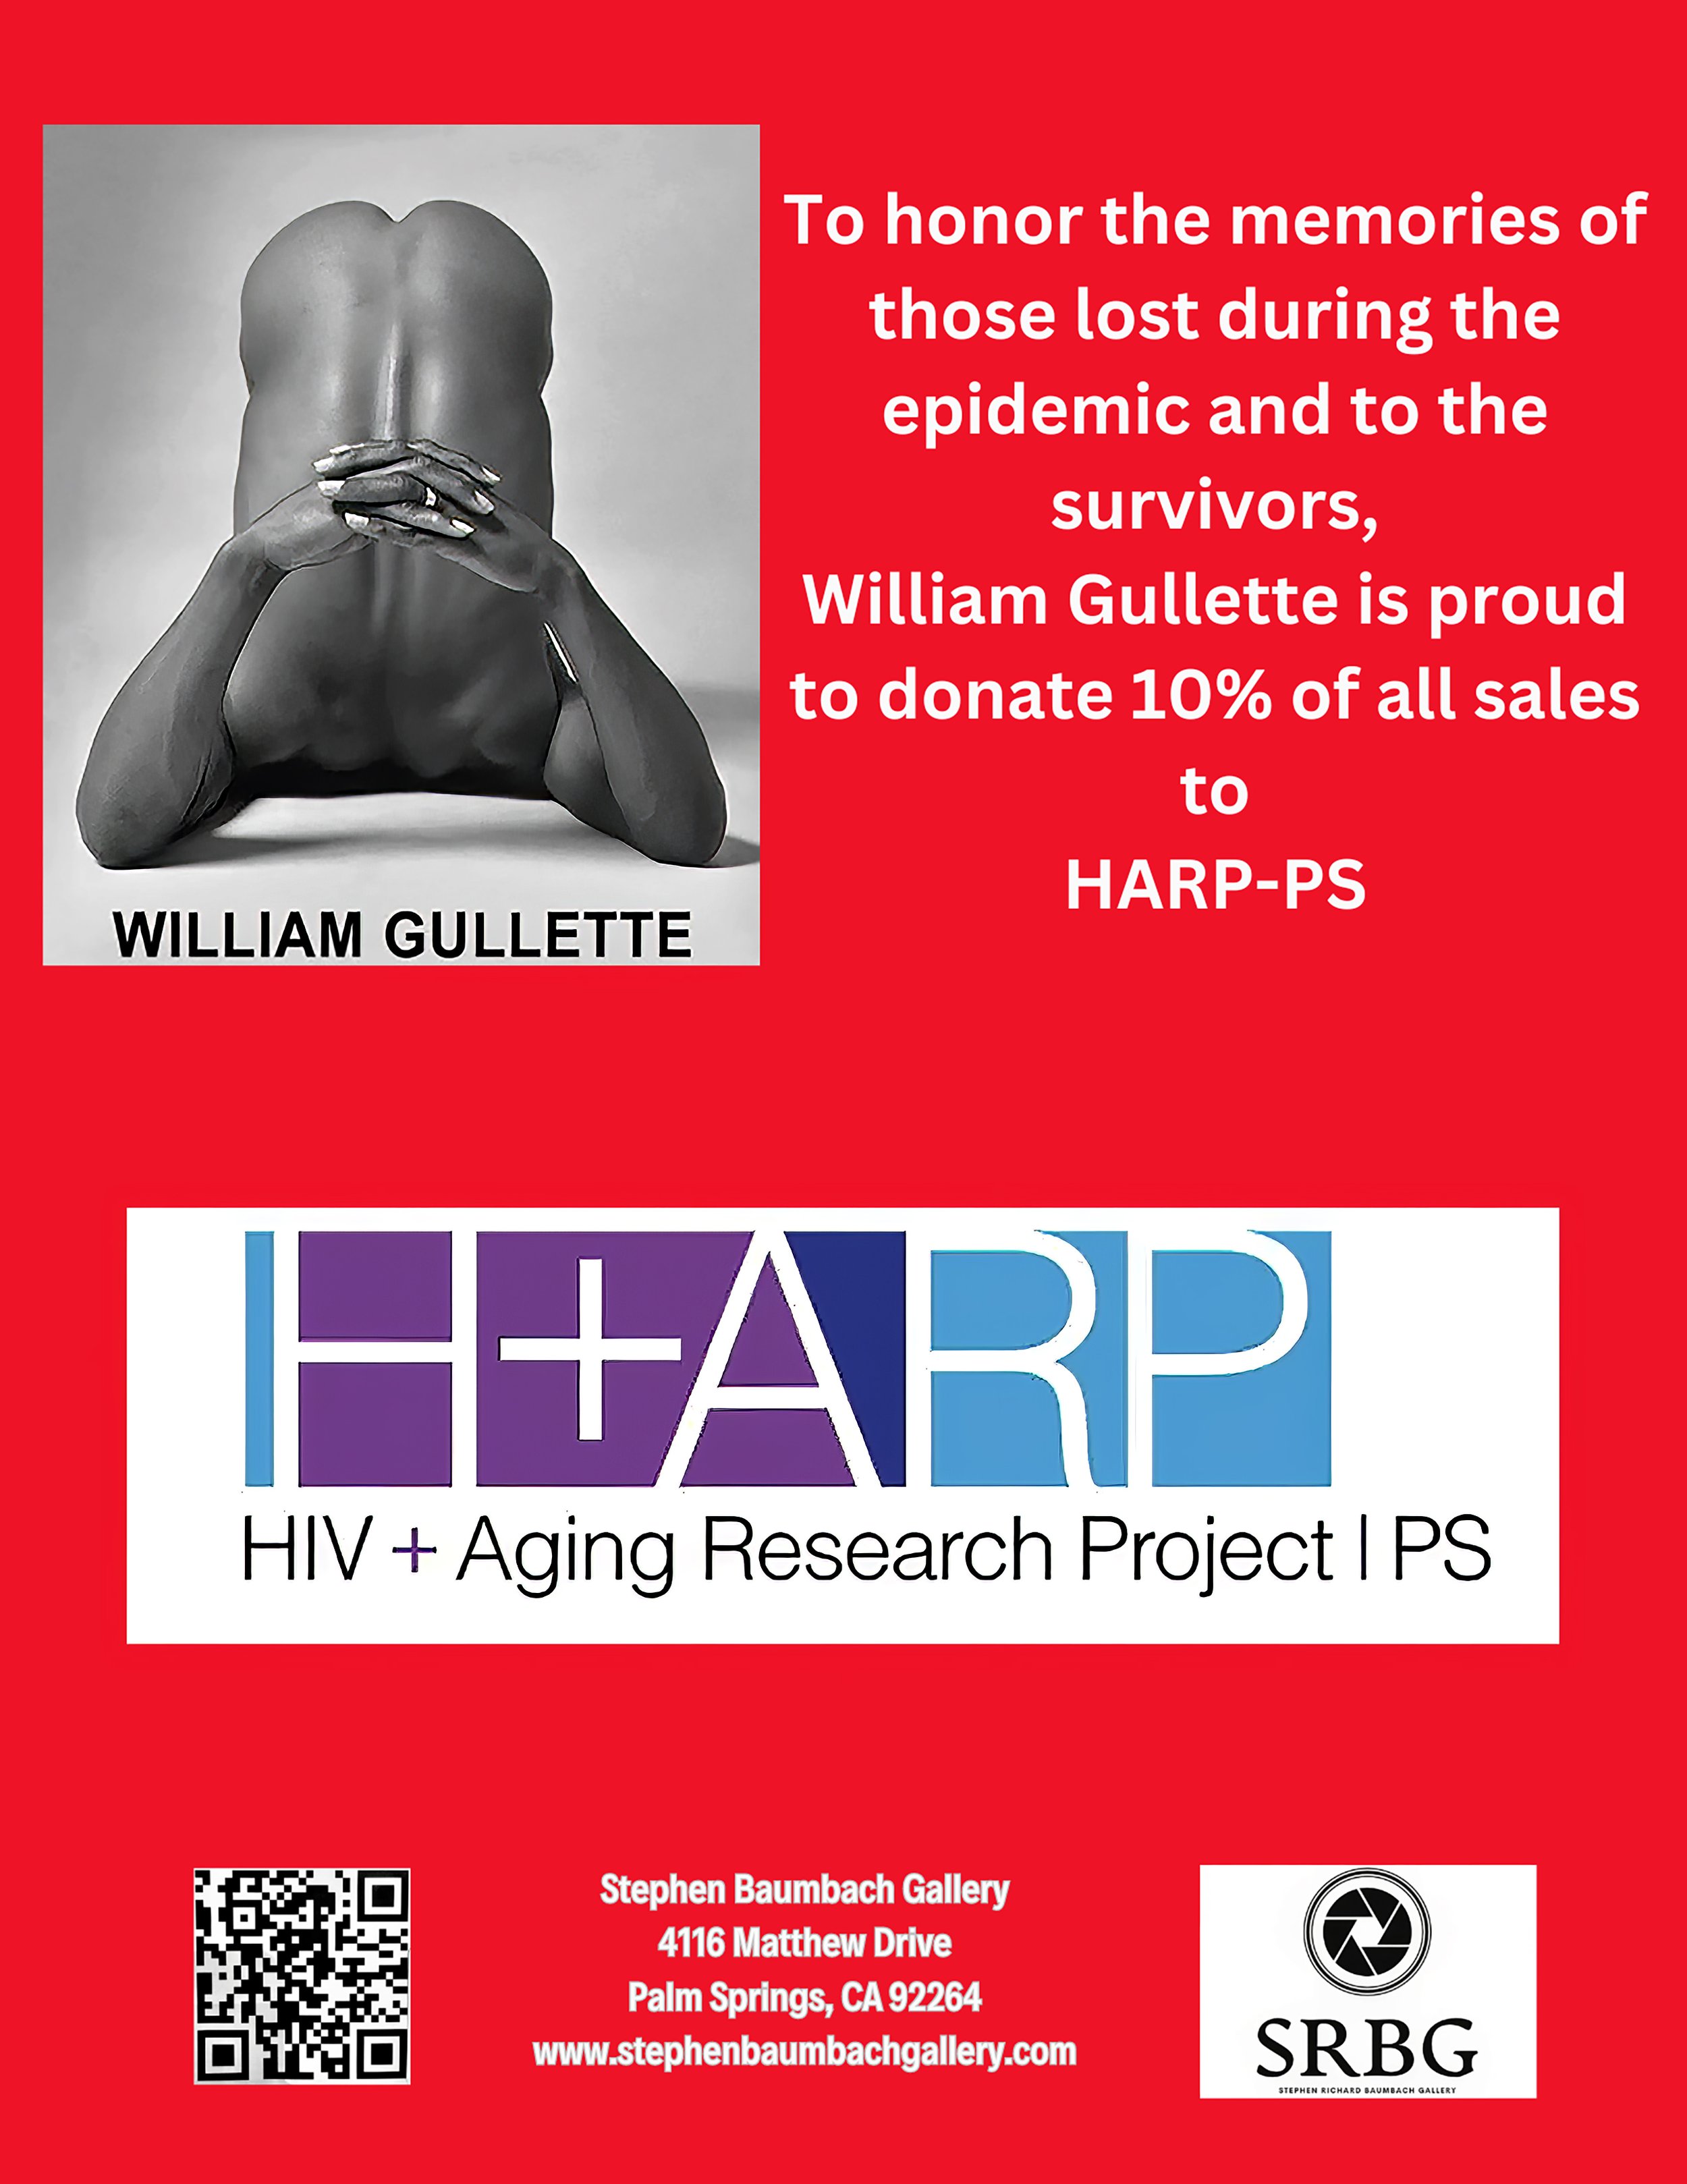 Donations to HIV Aging Research Project-Palm Springs